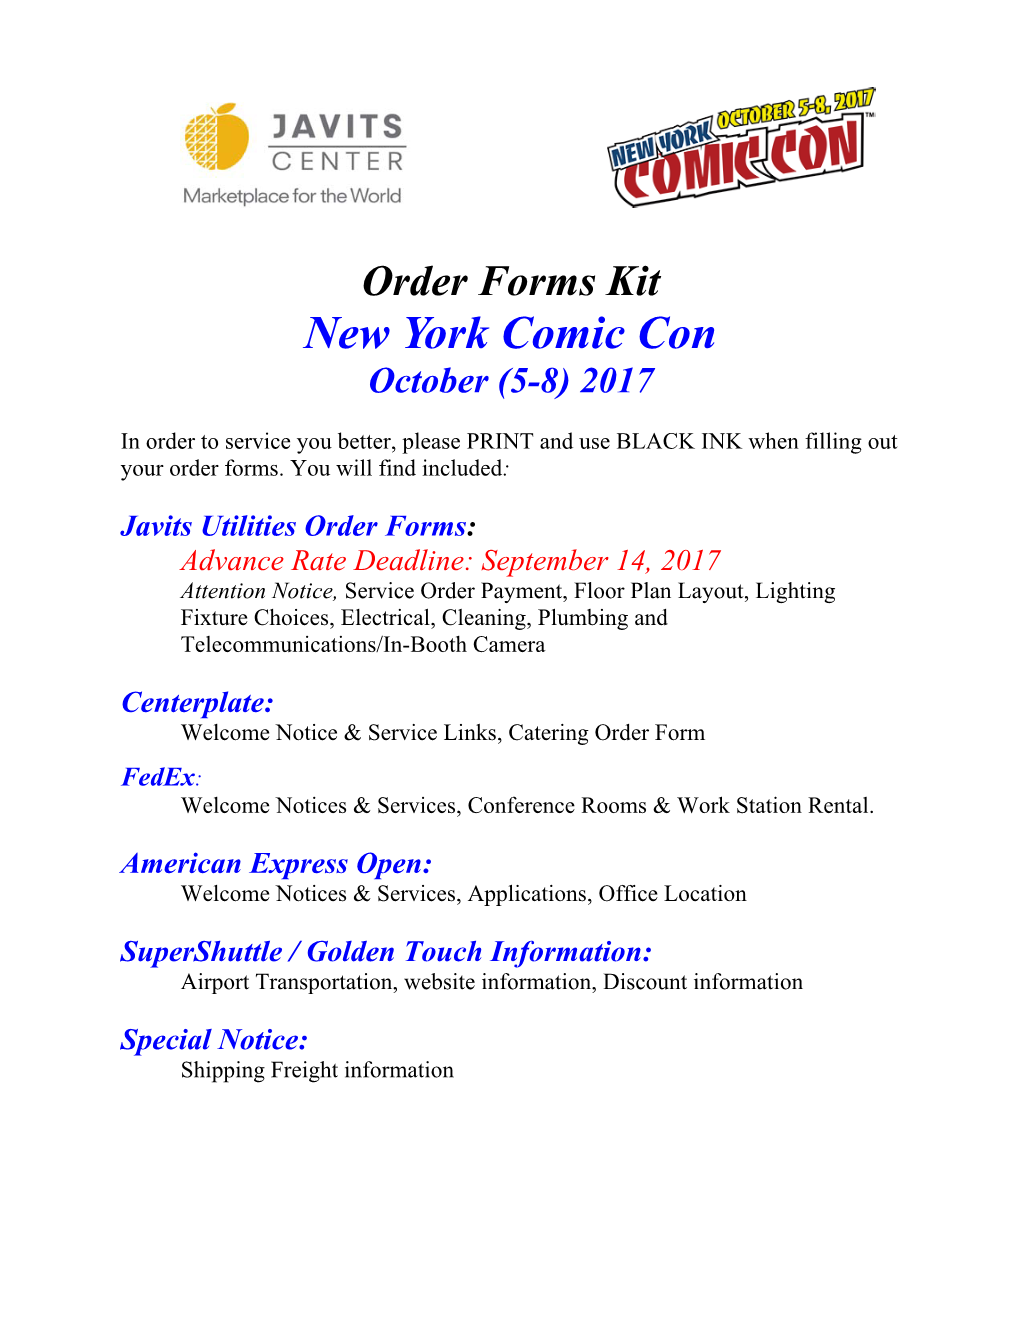 Order Forms Kit New York Comic Con October (5-8) 2017